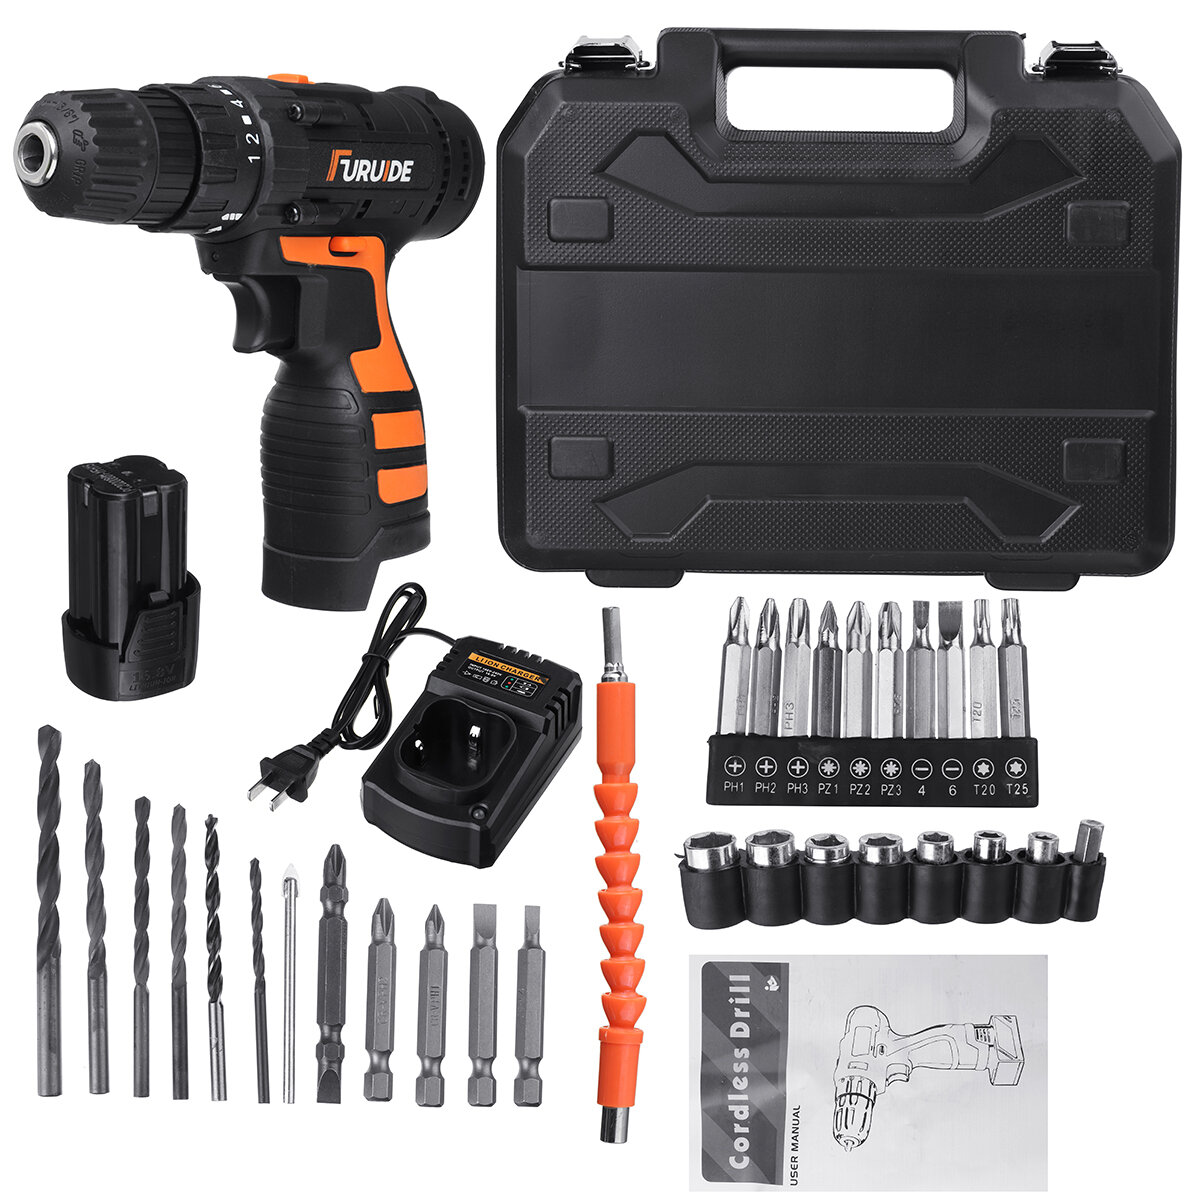 16.8V Electric Drill 2 Speed Electric Cordless Drill Electric Screwdriver Driver with Bits Set and Batteries